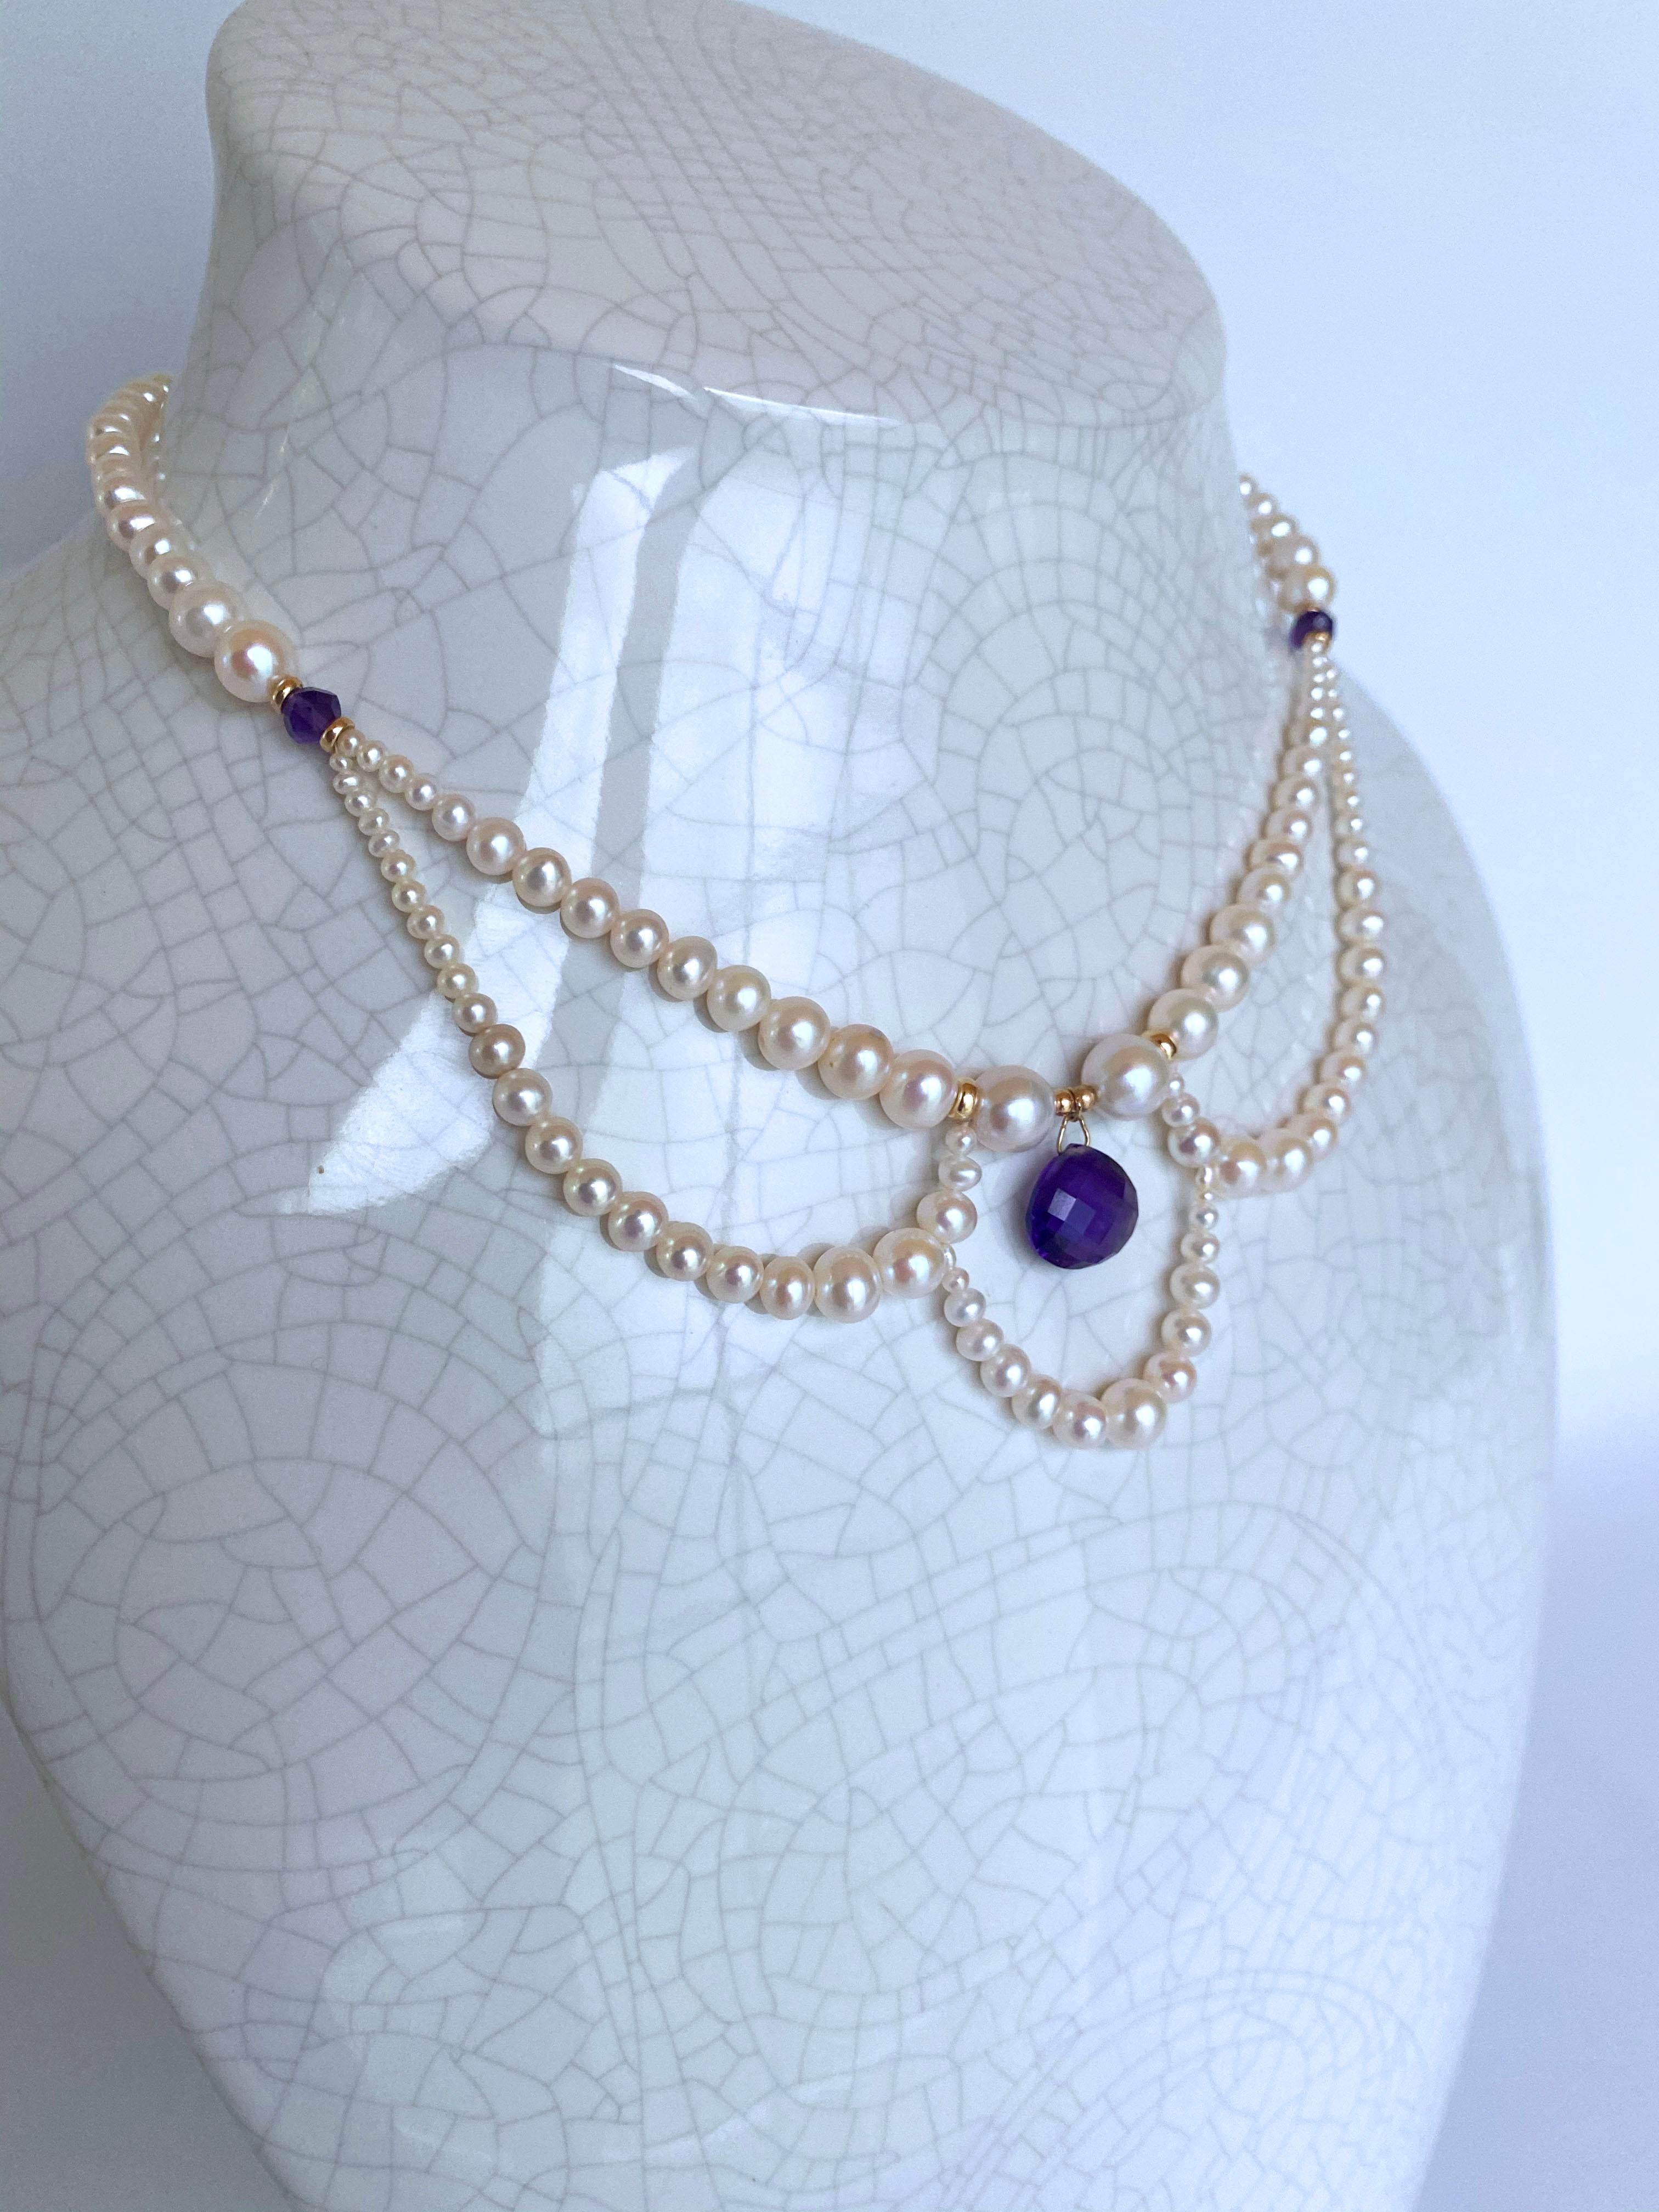 Bead Marina J. Graduated Pearl Necklace with Teardrop Amethyst and 14k Yellow Gold For Sale